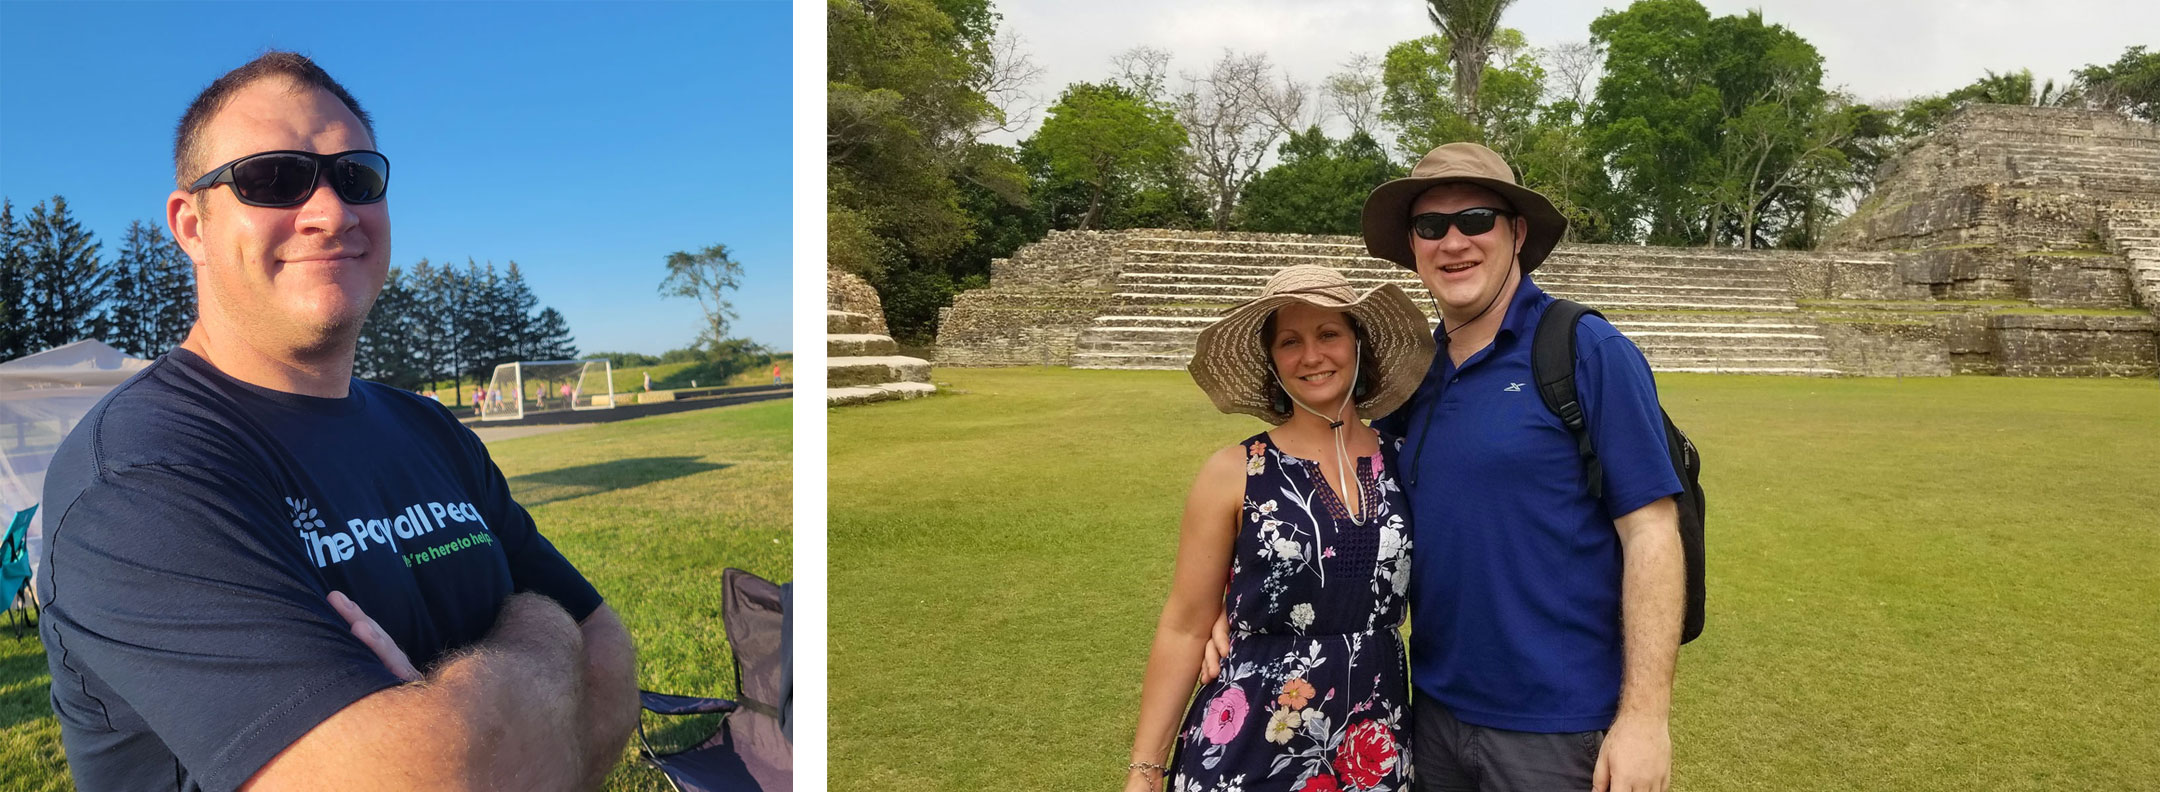 Photos of Sharon and Peter Hellenbrand at Relay for Life and in Belize